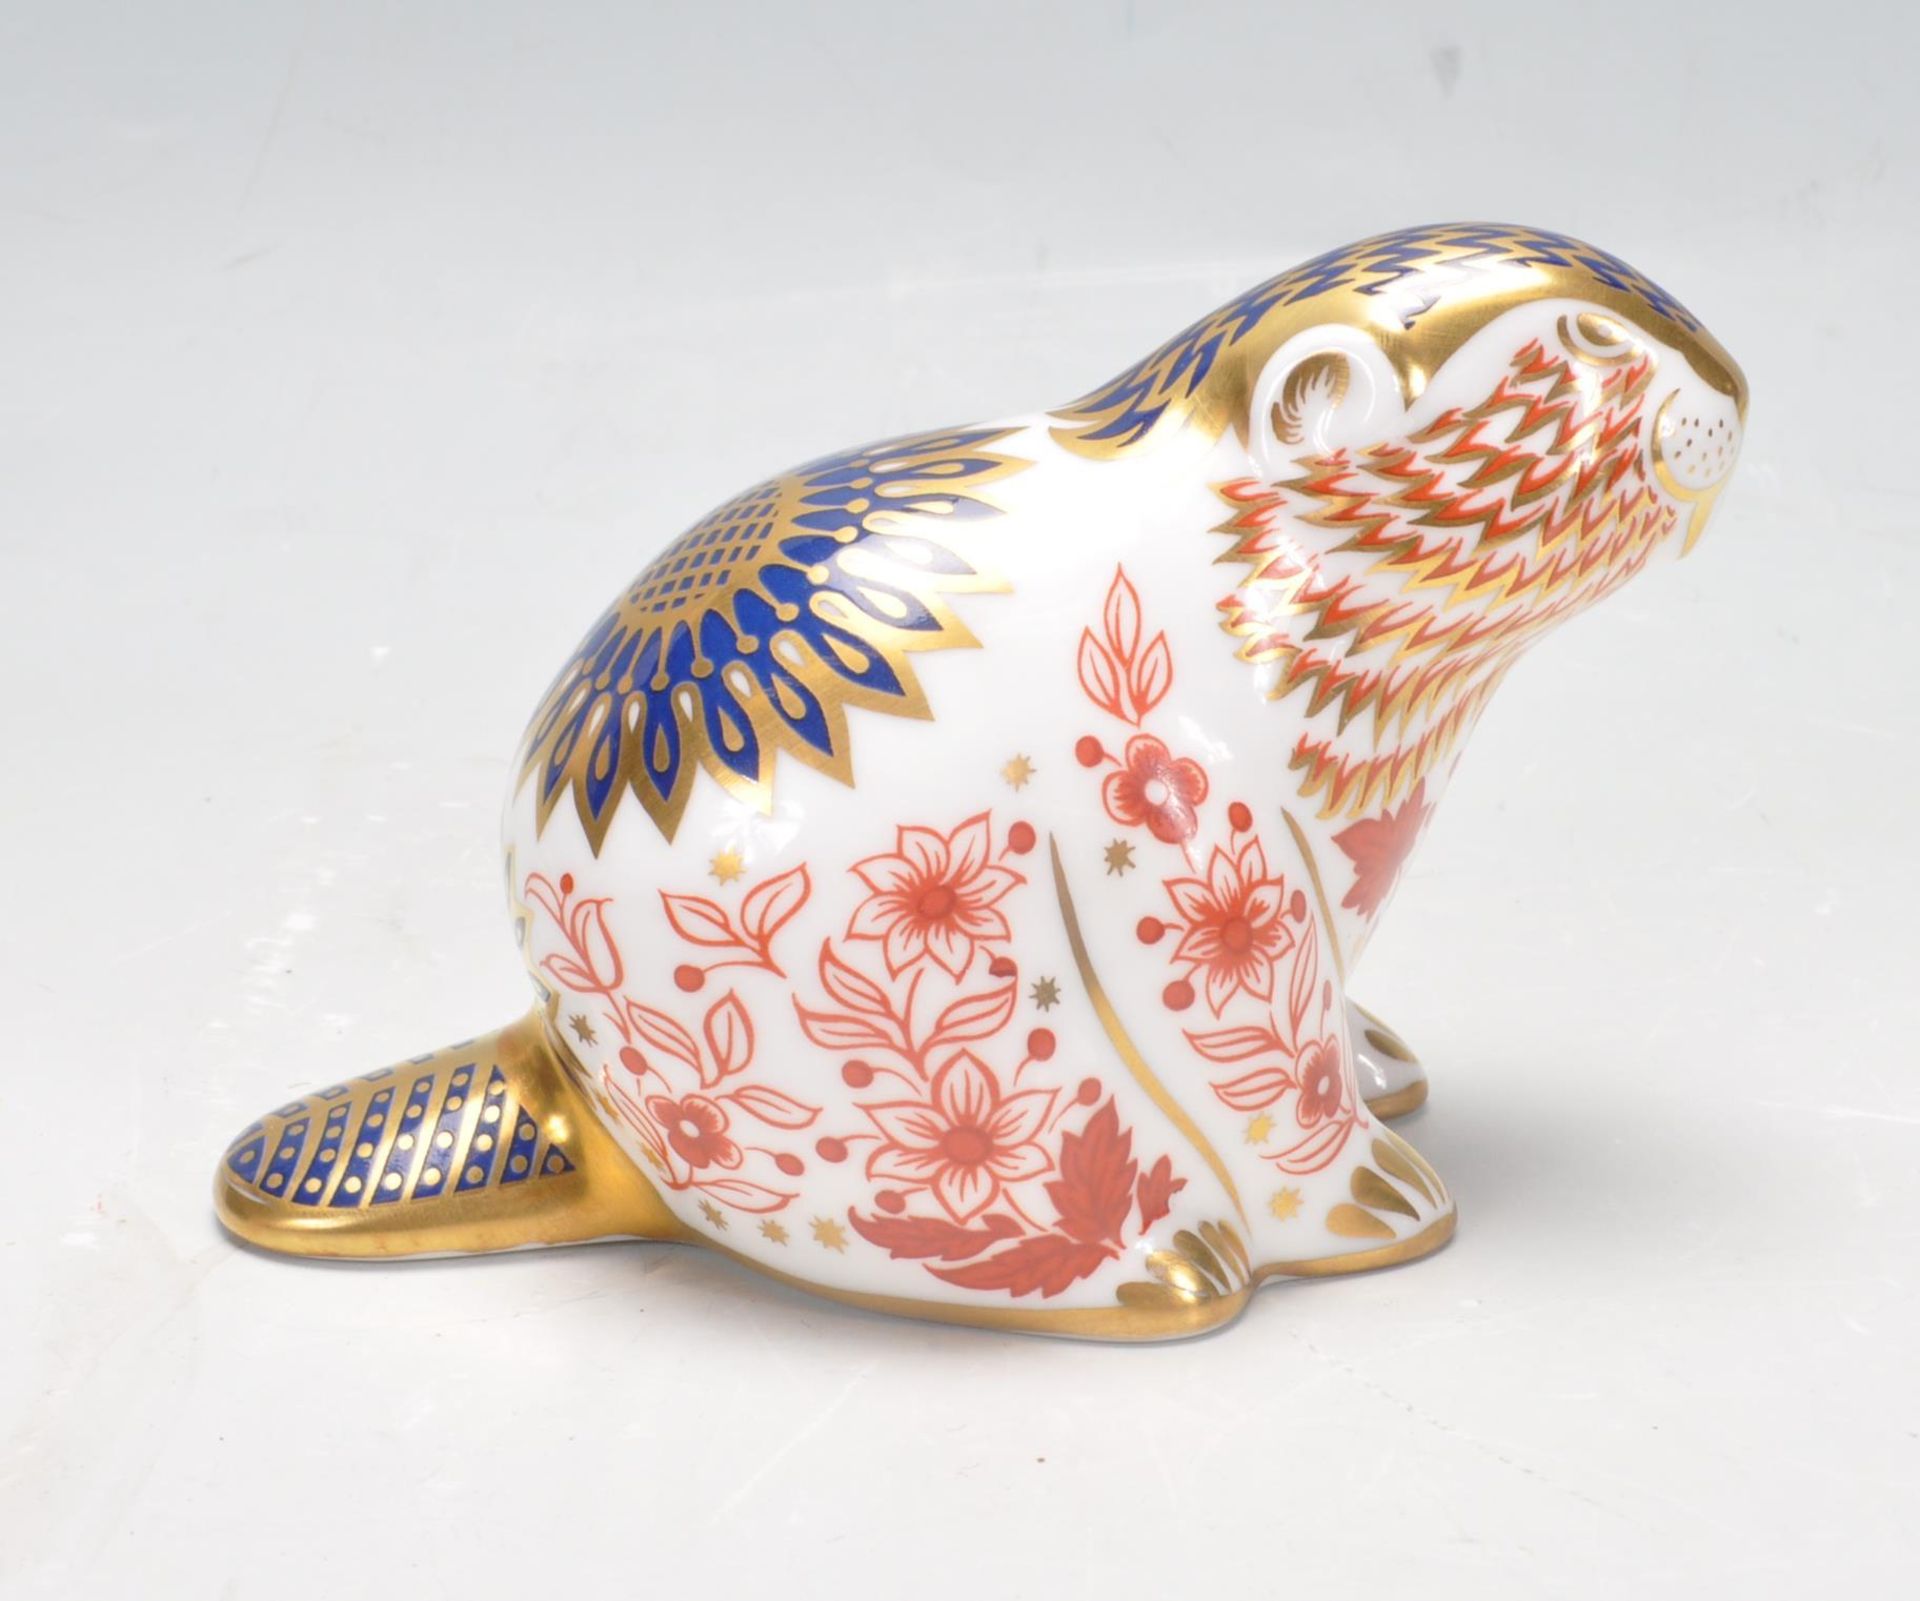 ROYAL CROWN DERBY BEAVER PAPERWEIGHT - Image 2 of 6